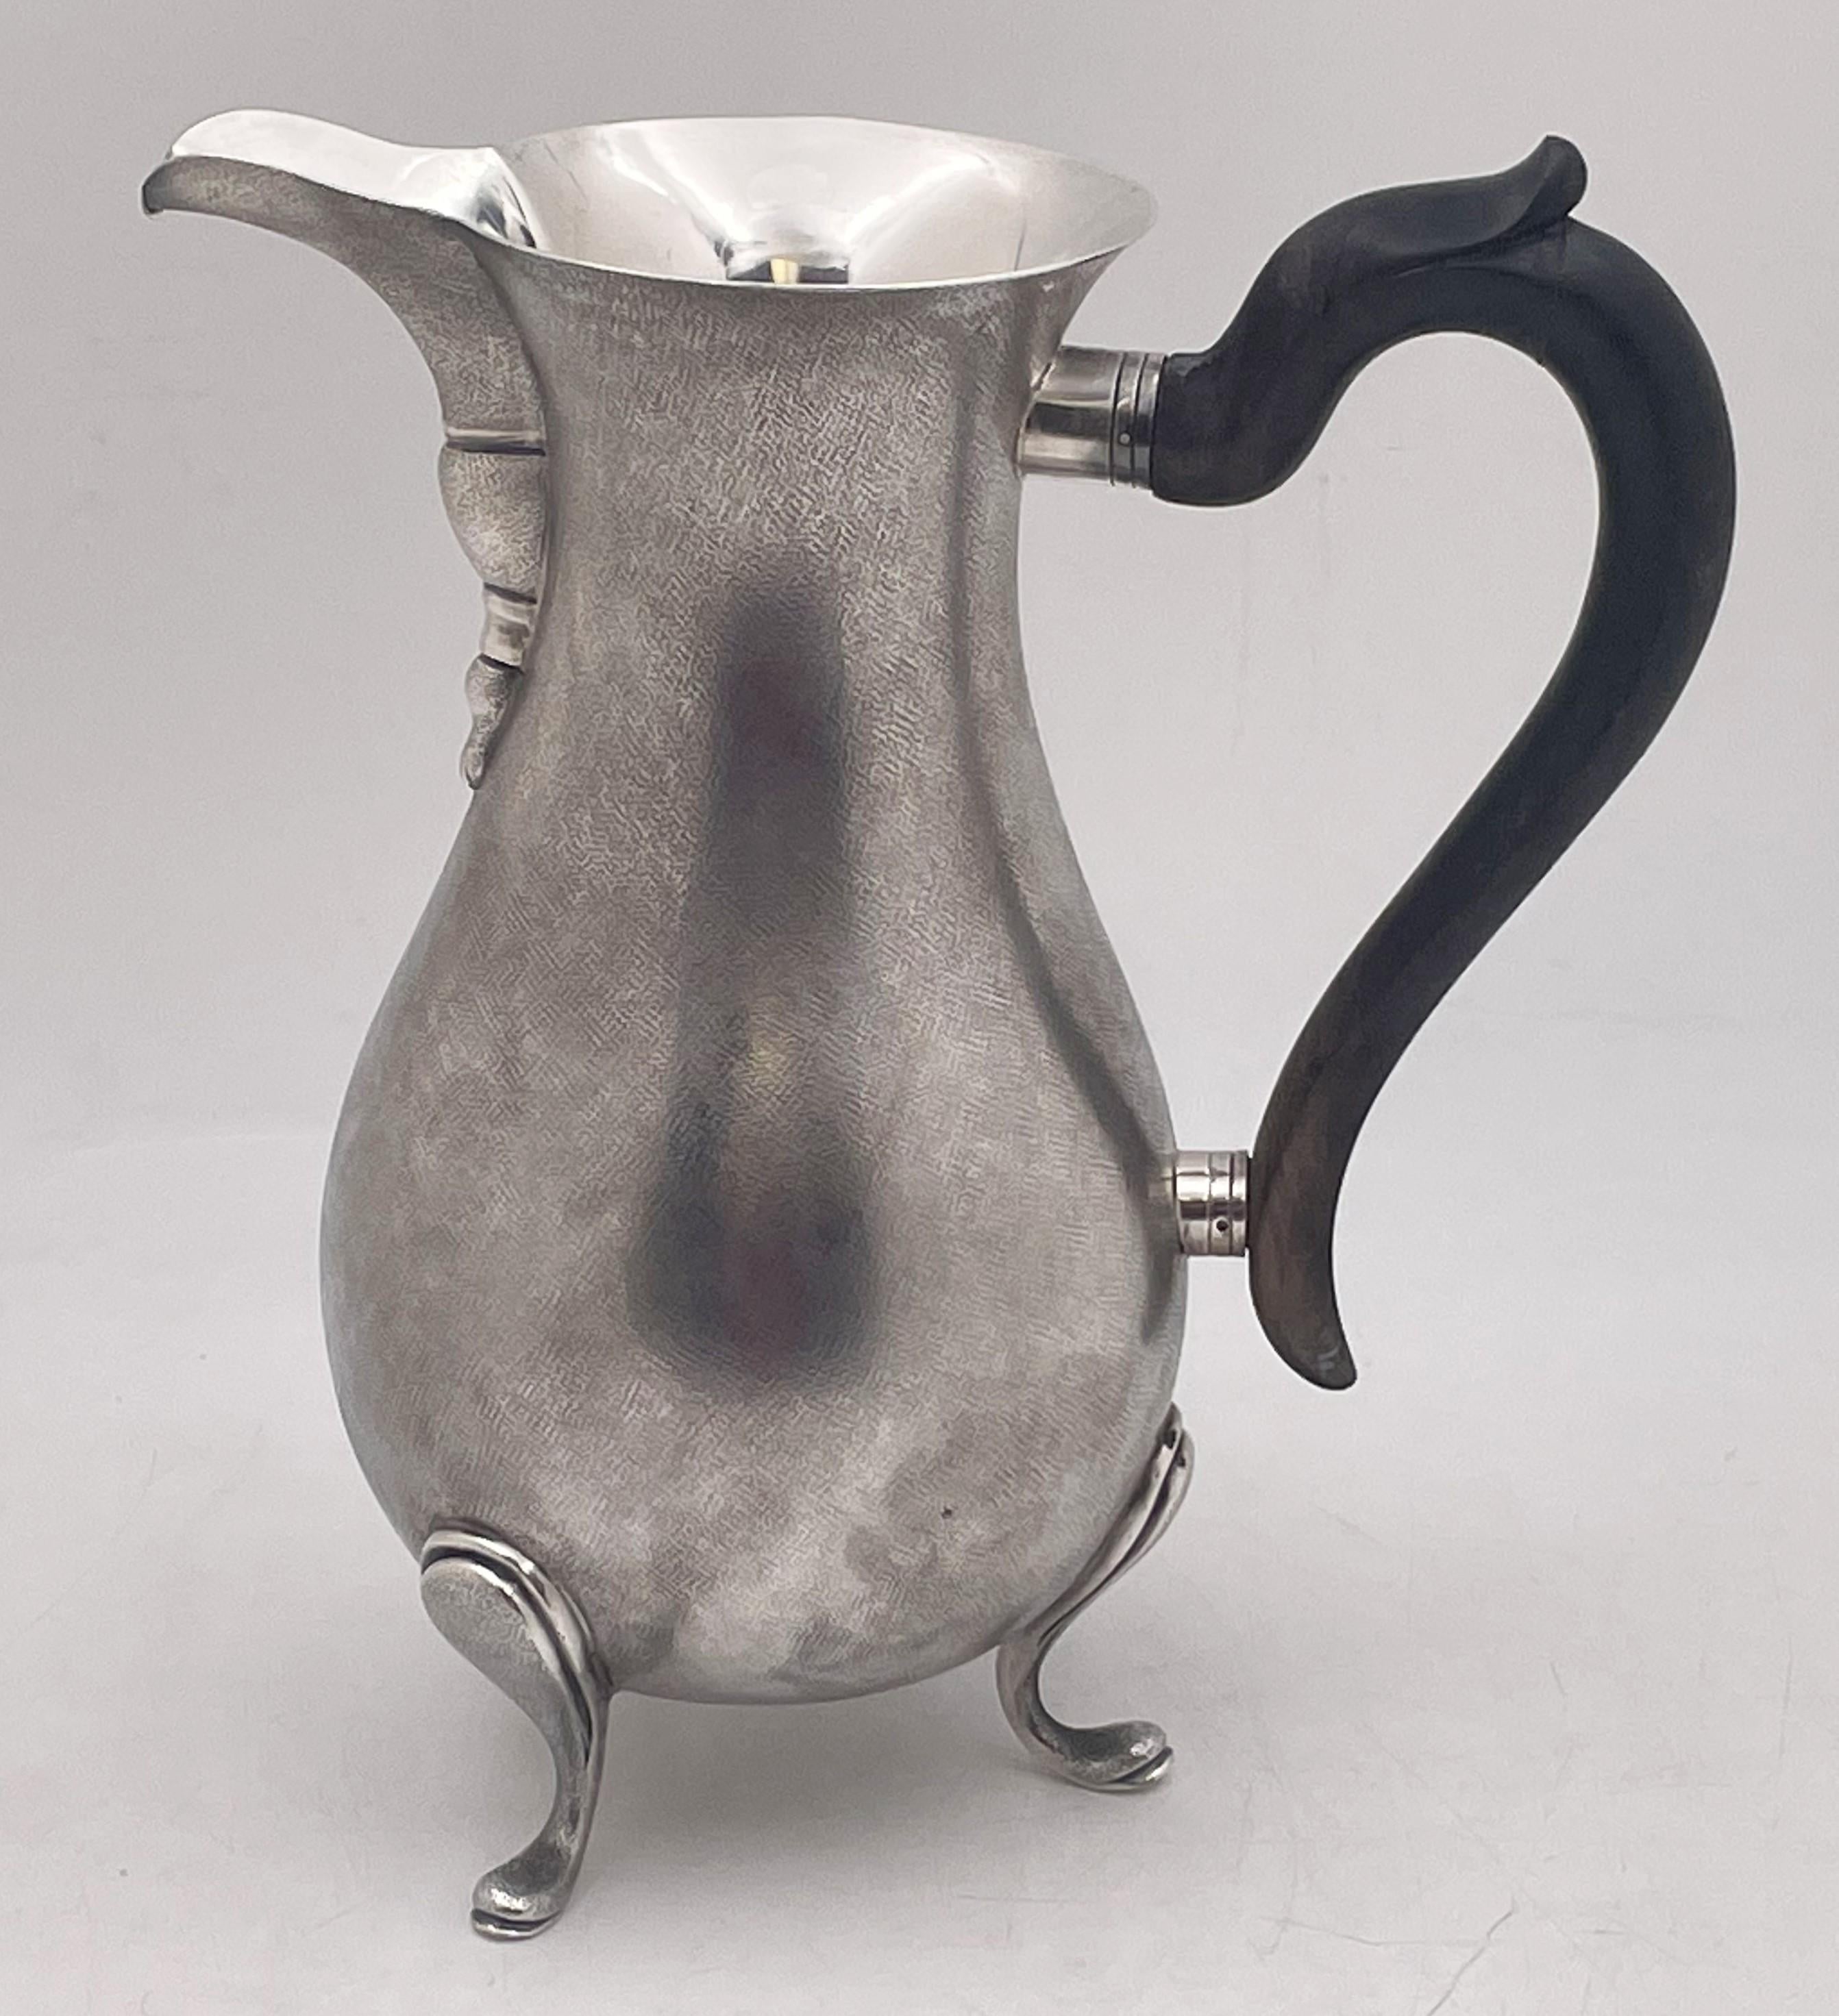 Buccellati, sterling silver bar pitcher, made in a rare Buccellati technique with satin finish, with a wood handle, standing on 3 curvilinear legs. It measures 9 1/2'' in height by 8 1/2'' from handle to spout, weighs 28.6 troy ounces, and bears